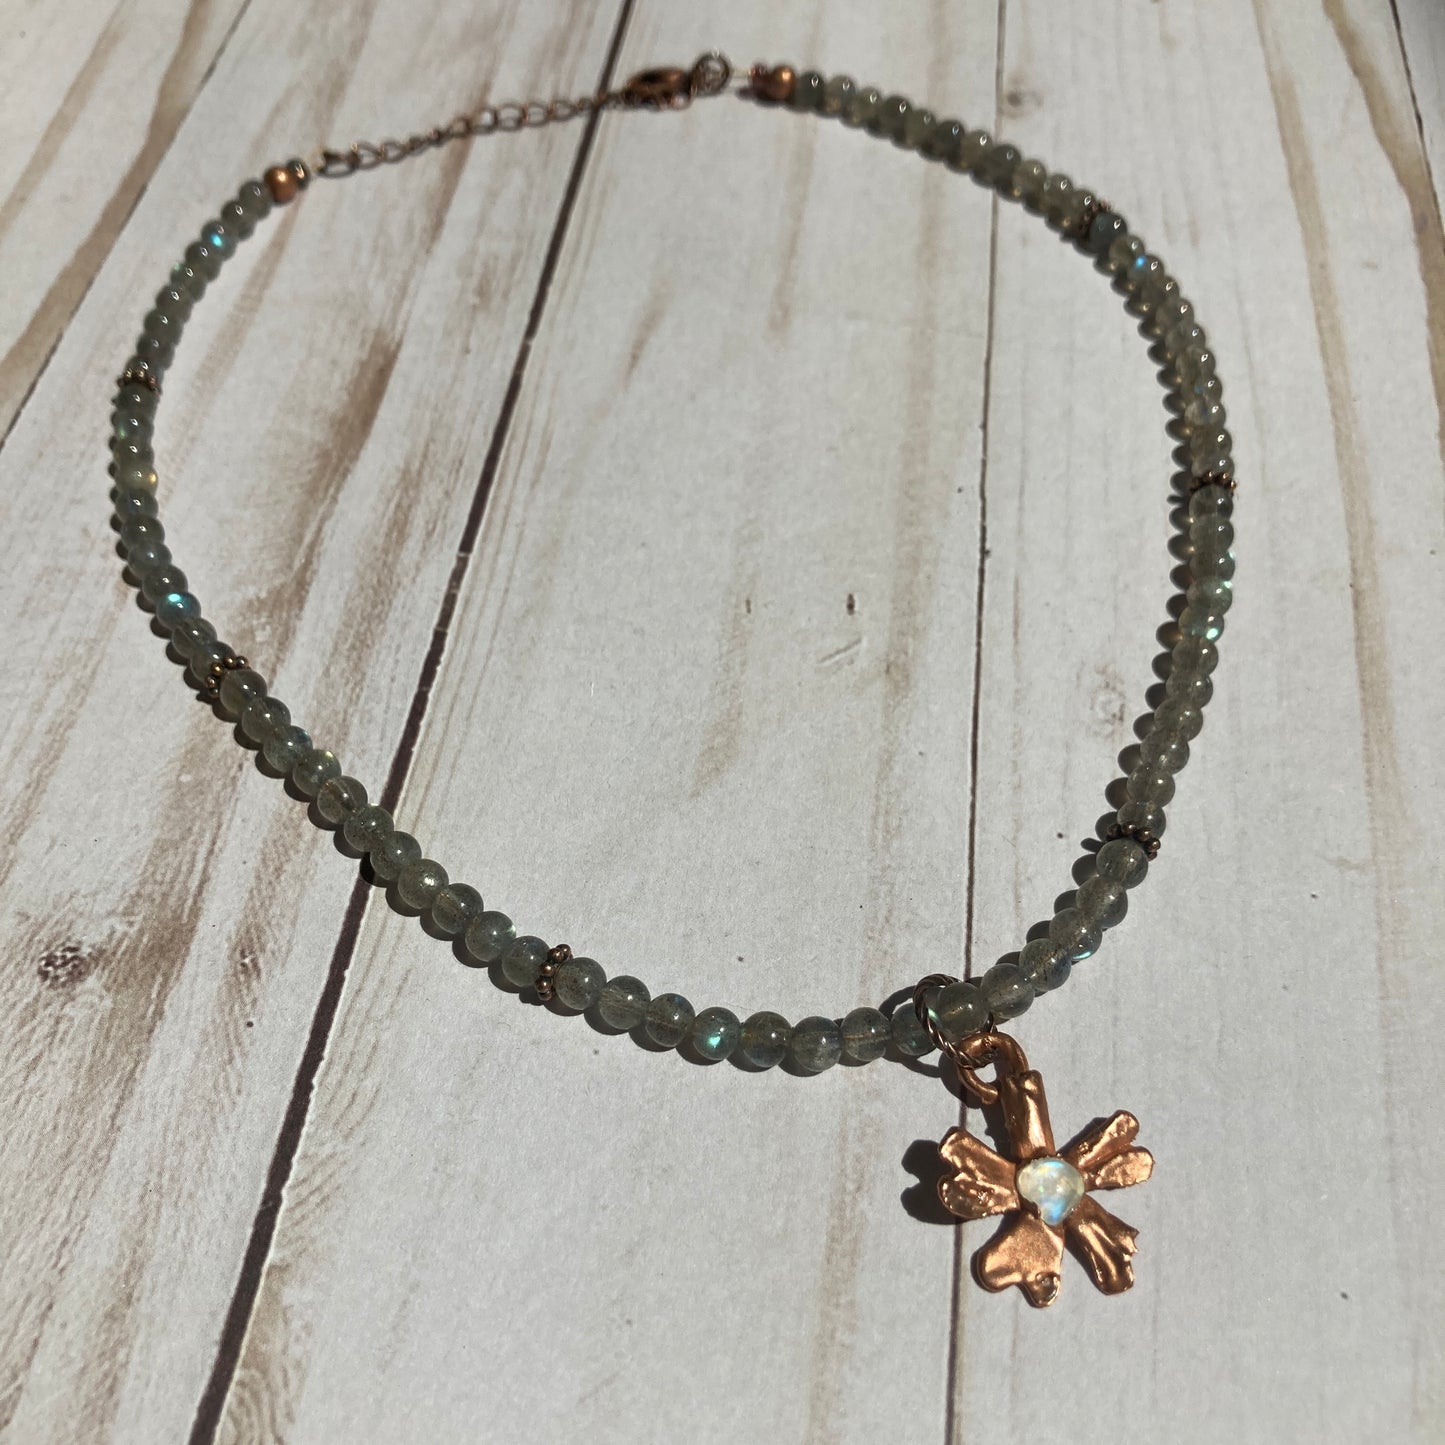 Labradorite Necklace with Moonstone Studded Copper Flower Charm